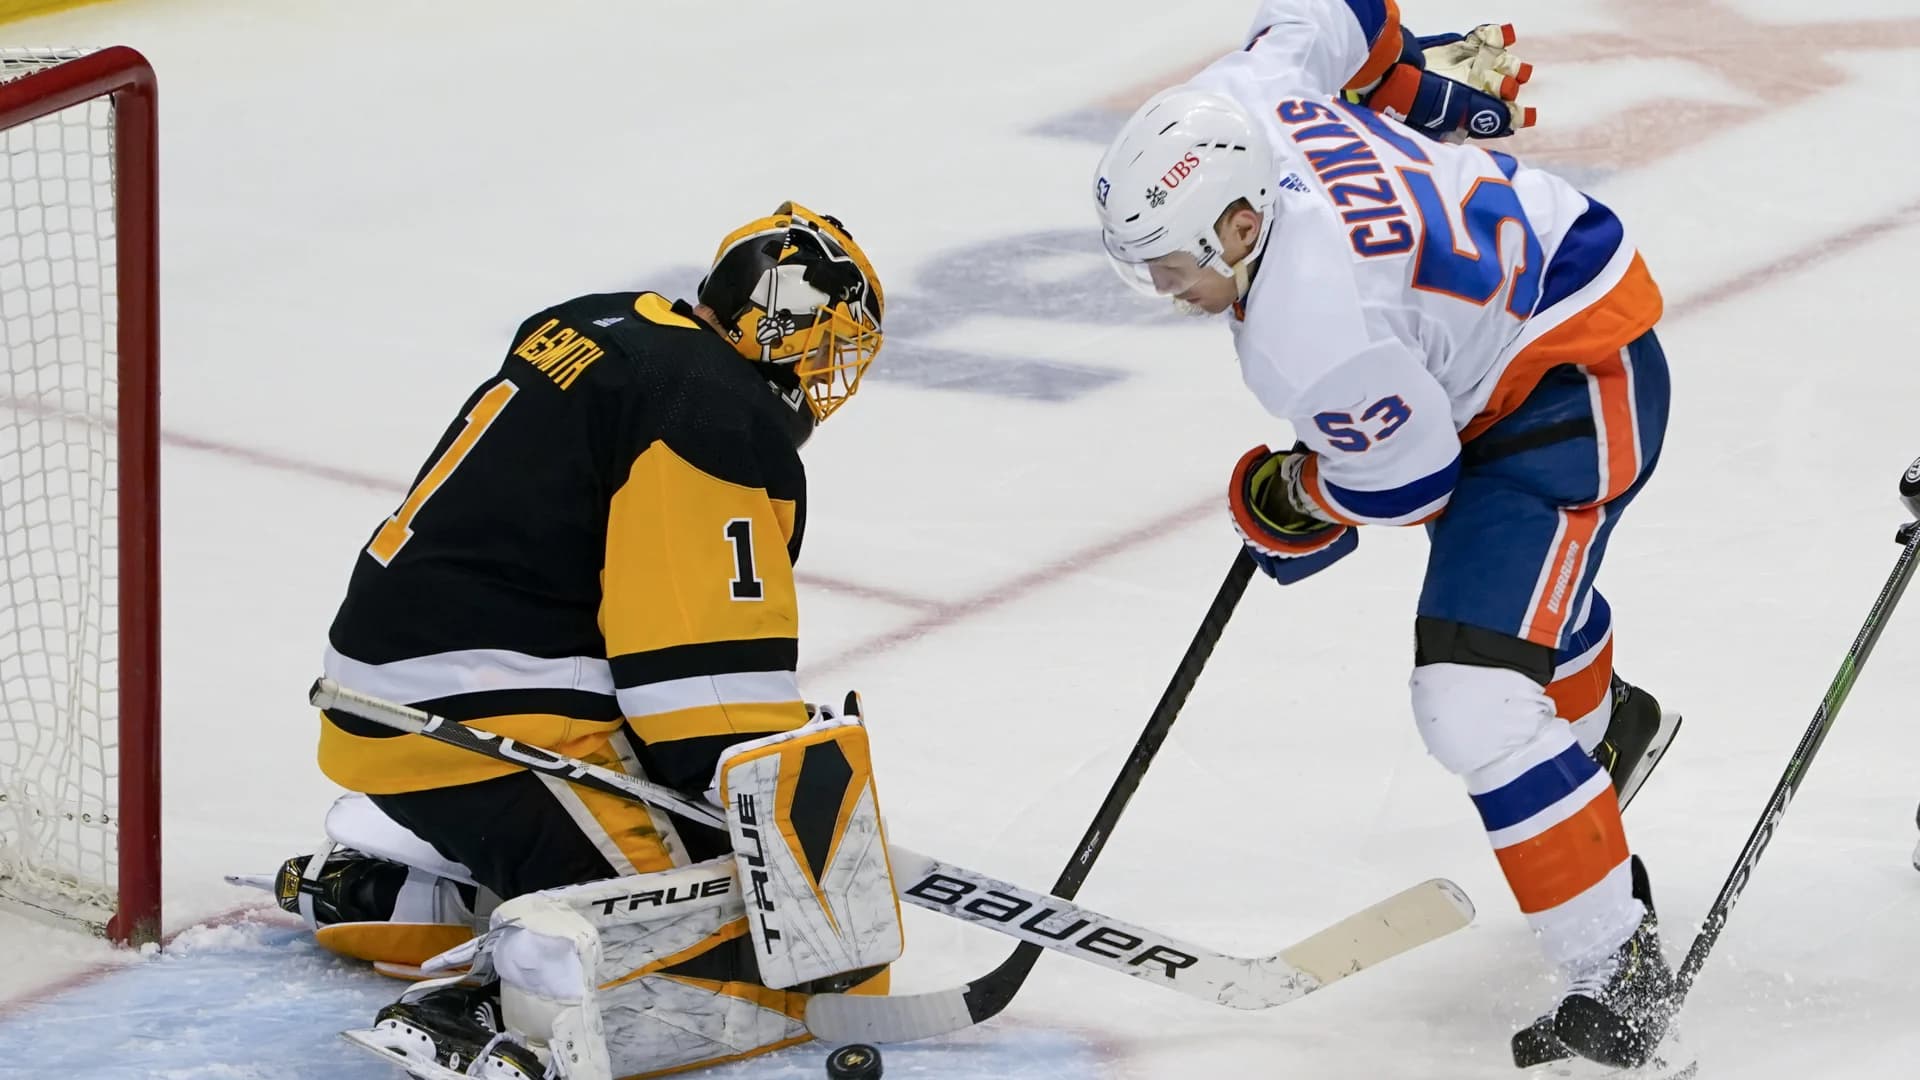 Isles-Penguins playoff schedule announced; ticket sales still to come